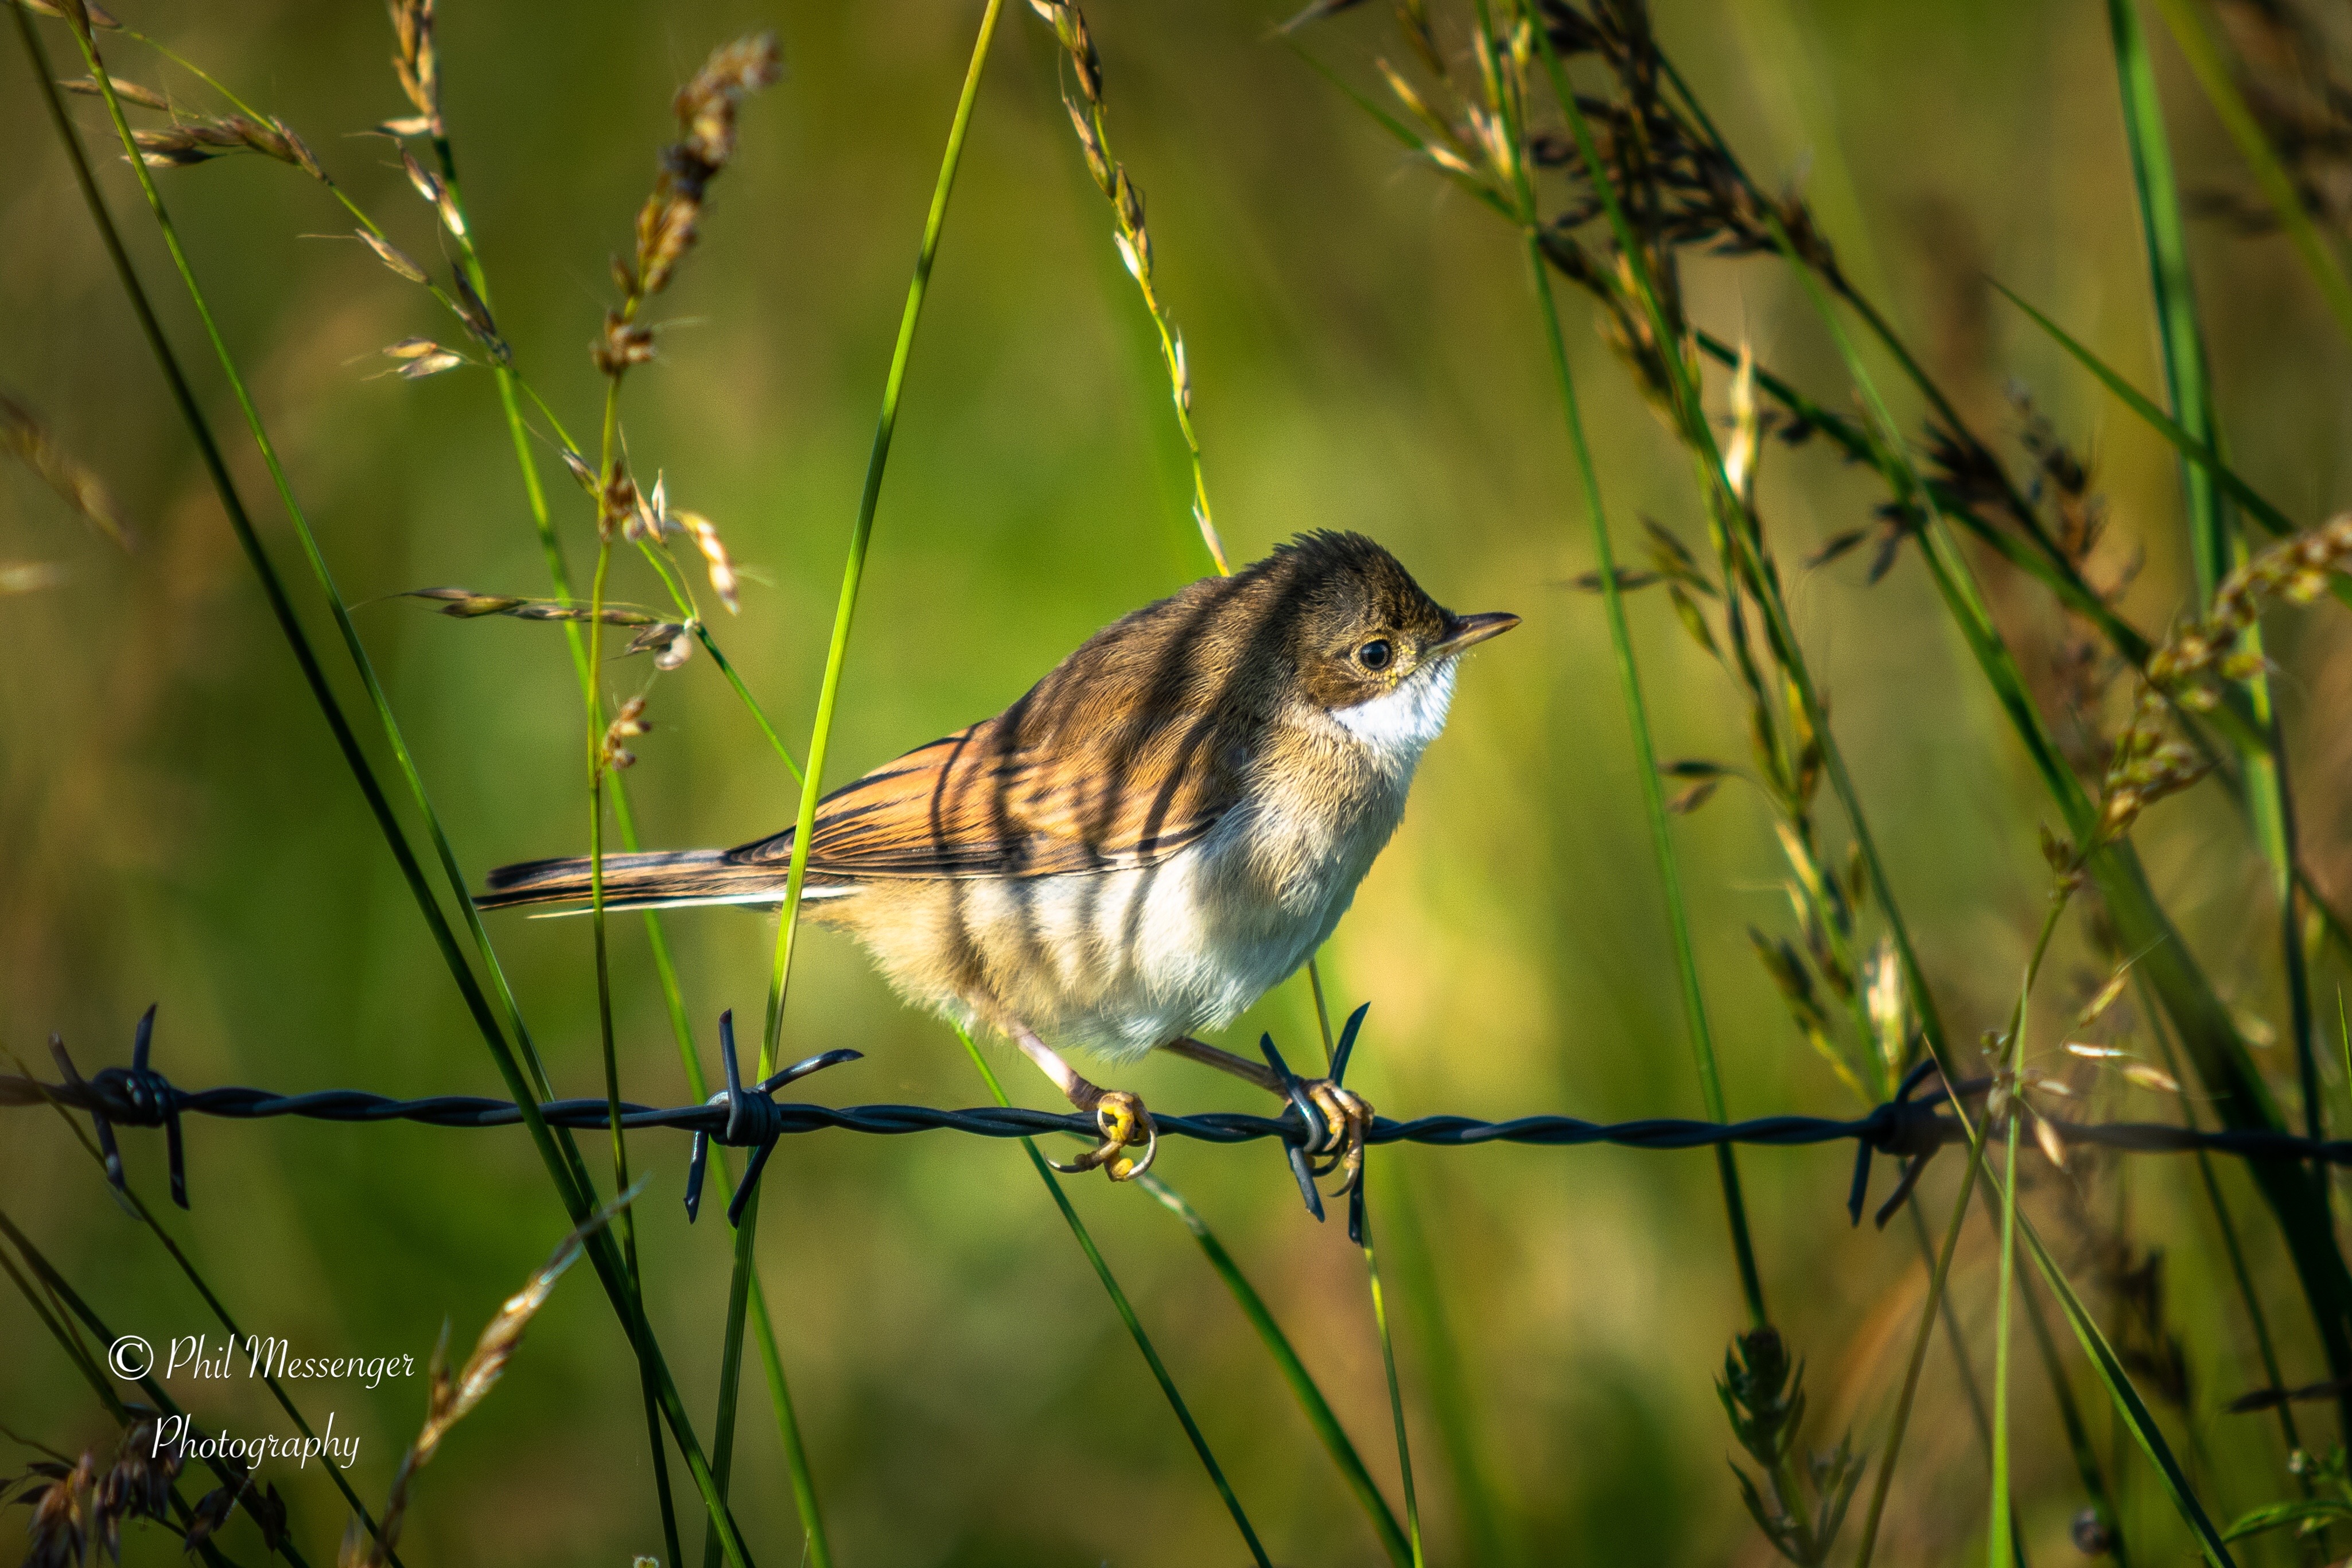 A whitethroat on a barbed wire fence.